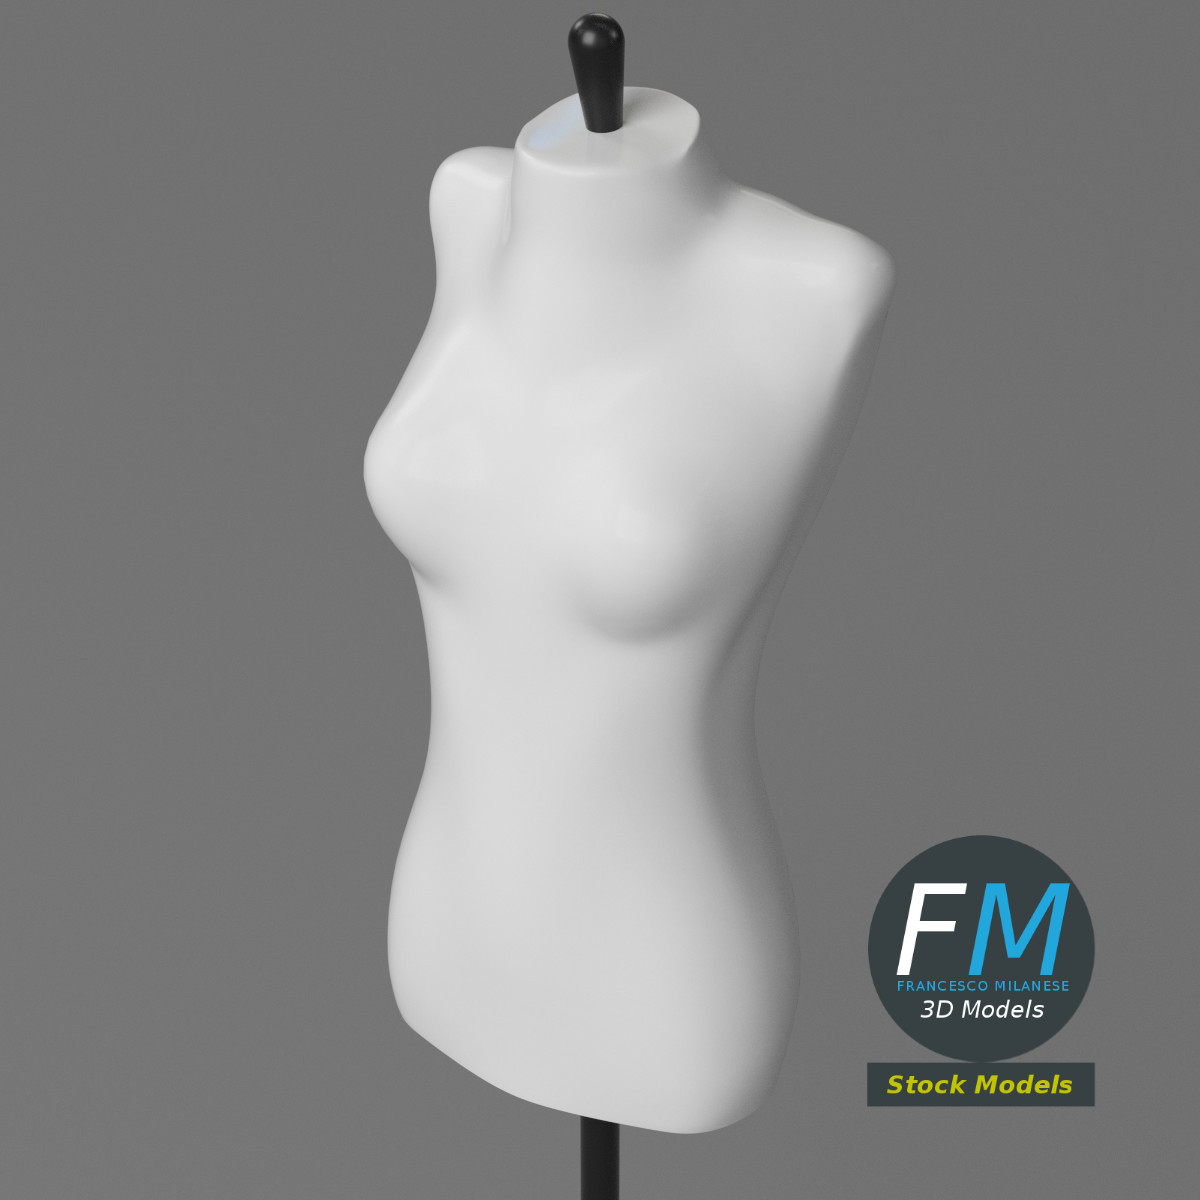 40,624 Mannequin Stand Images, Stock Photos, 3D objects, & Vectors